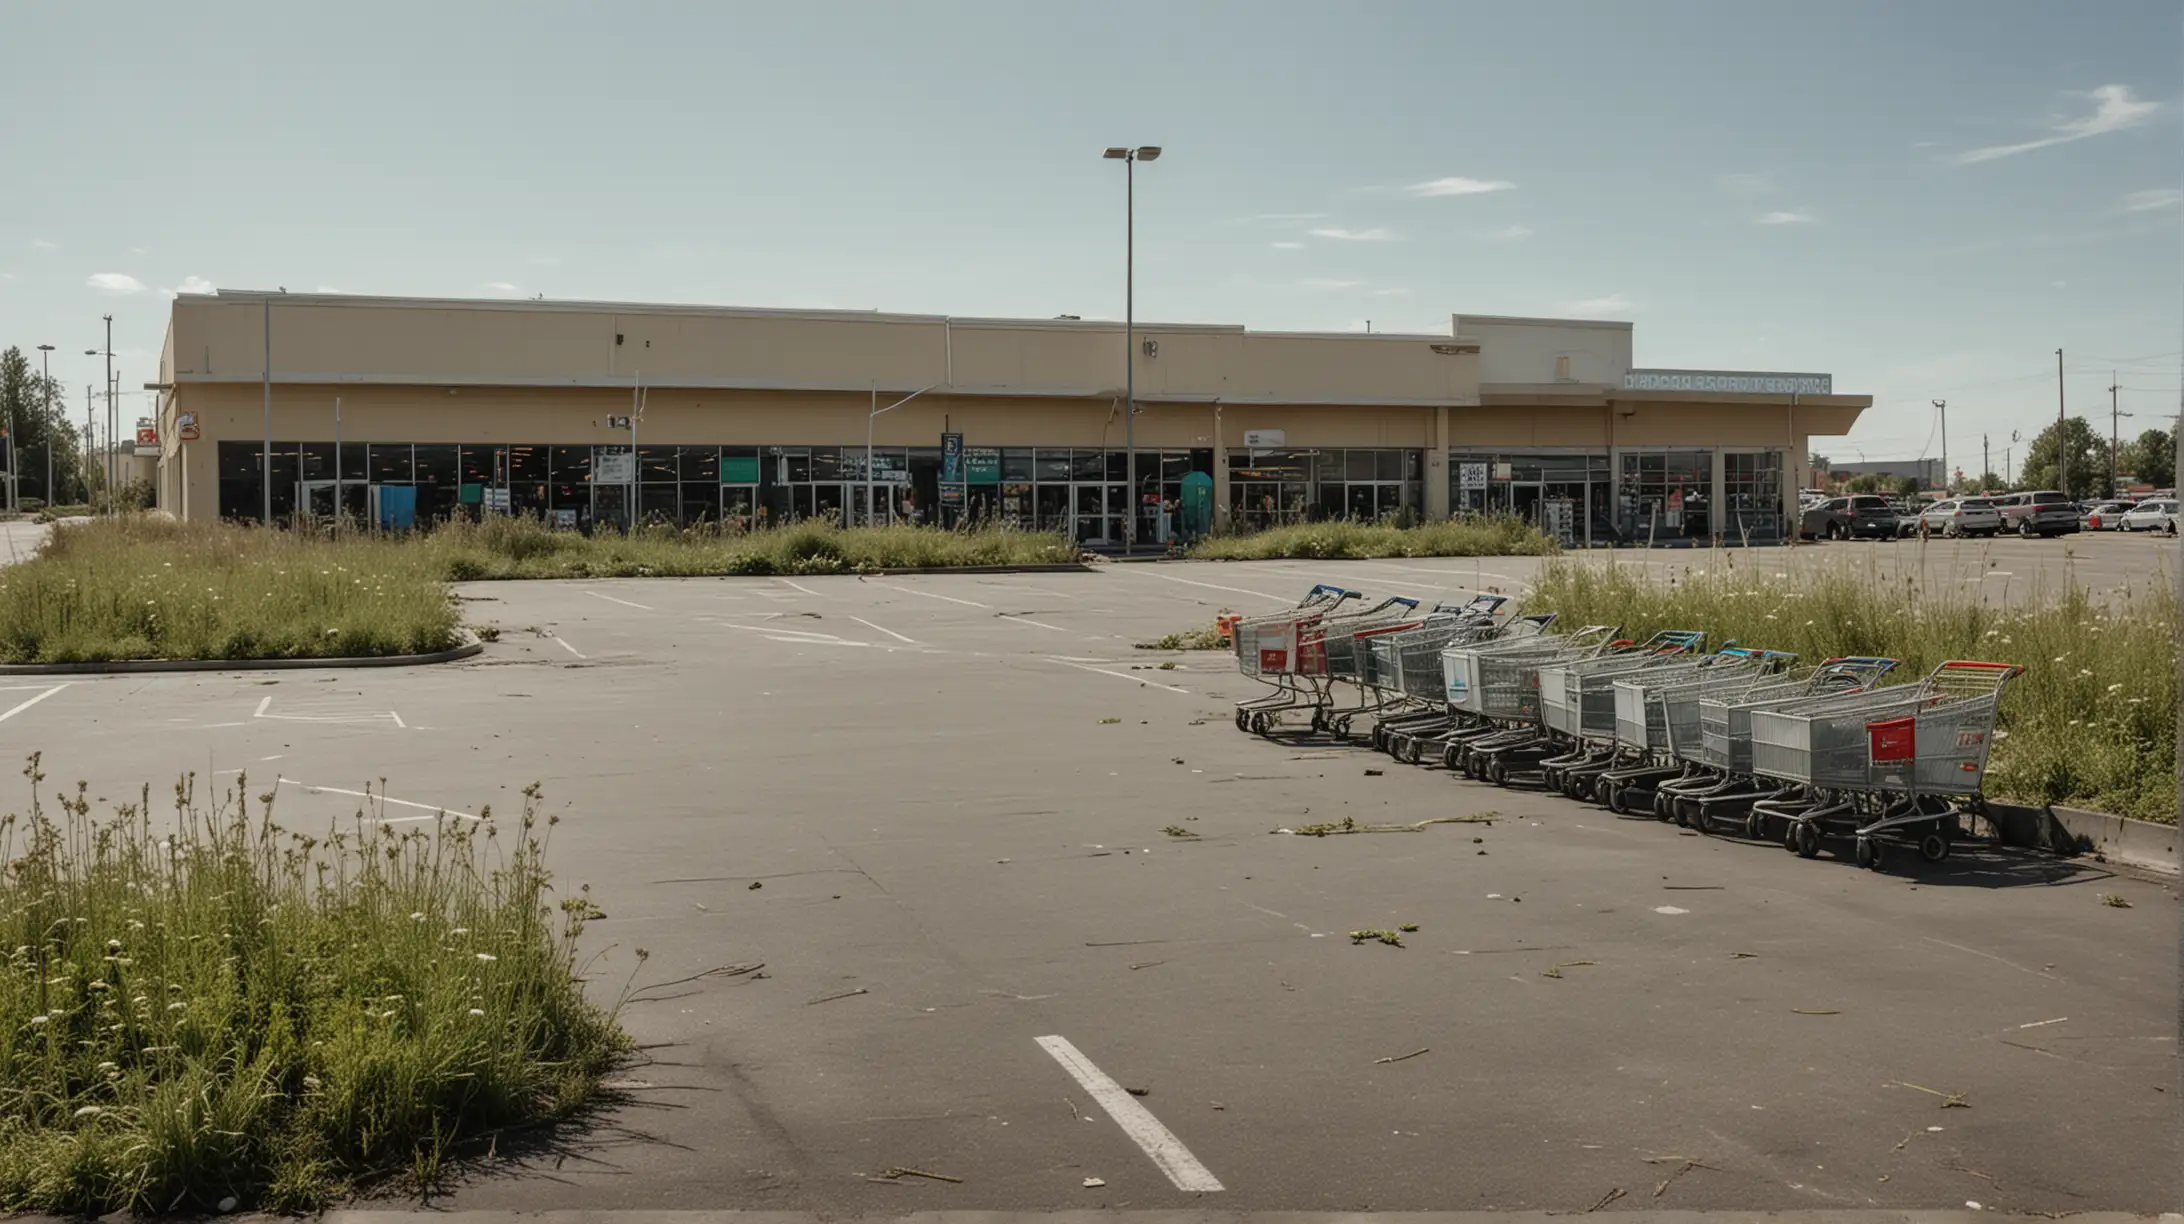 An apocalyptic, frontage of a supermarket, with carts and weeds growing in the parking lot